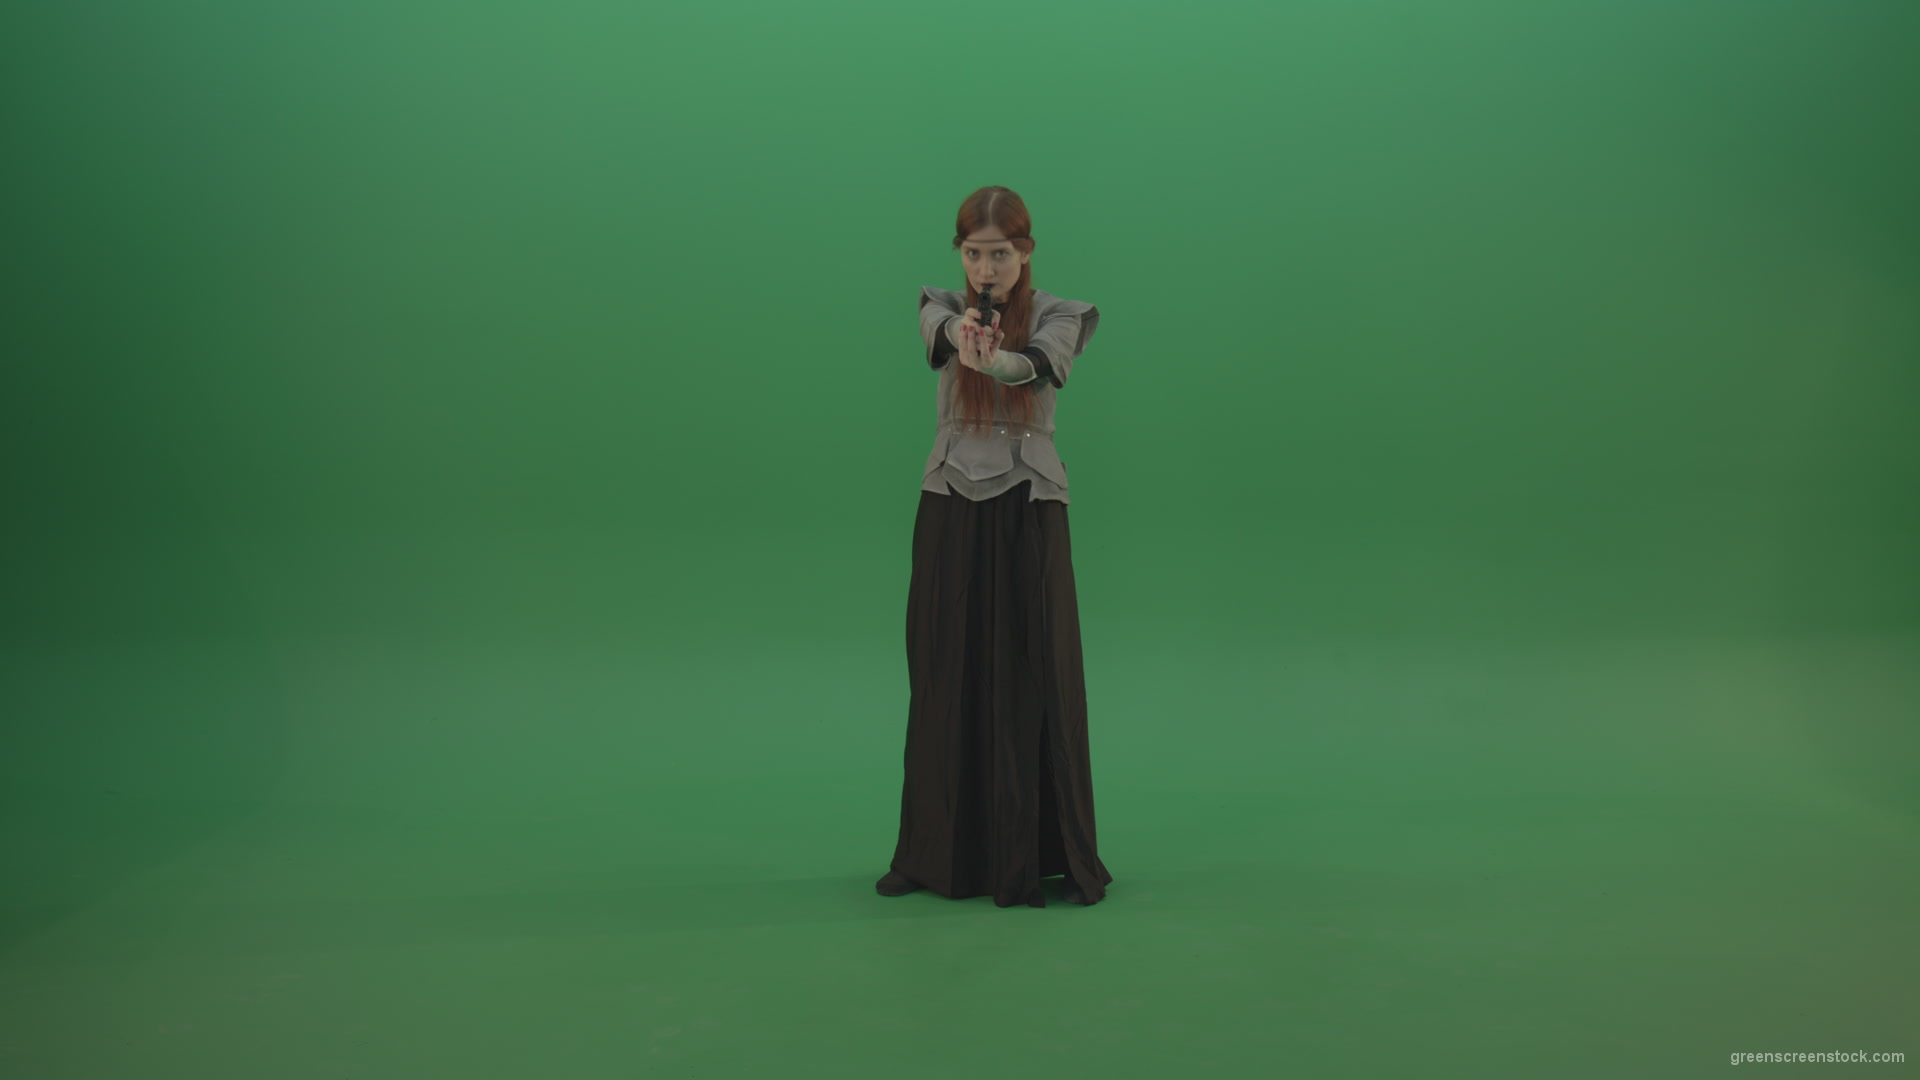 Girl-dressed-in-an-ancient-costume-holds-a-gun-in-her-hands-walks-and-shoots_009 Green Screen Stock